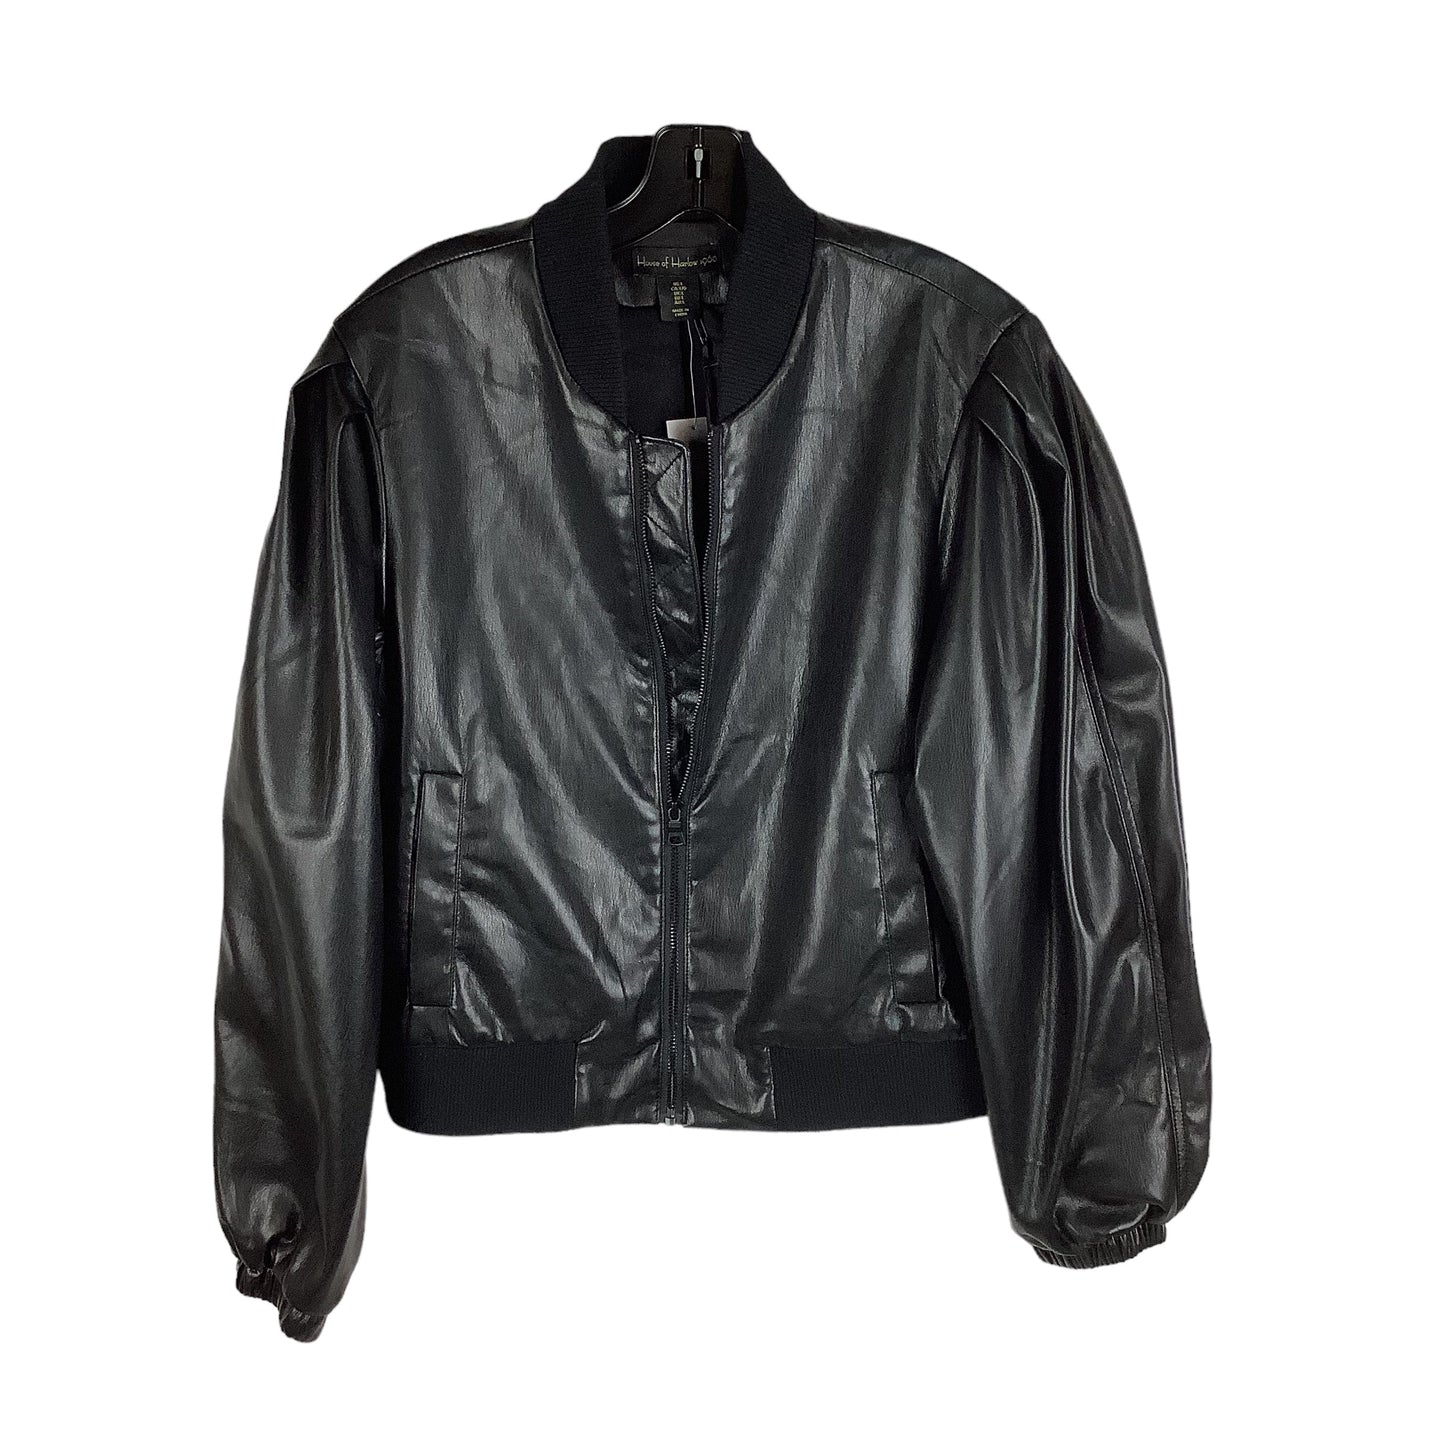 Black Jacket Other House Of Harlow, Size L